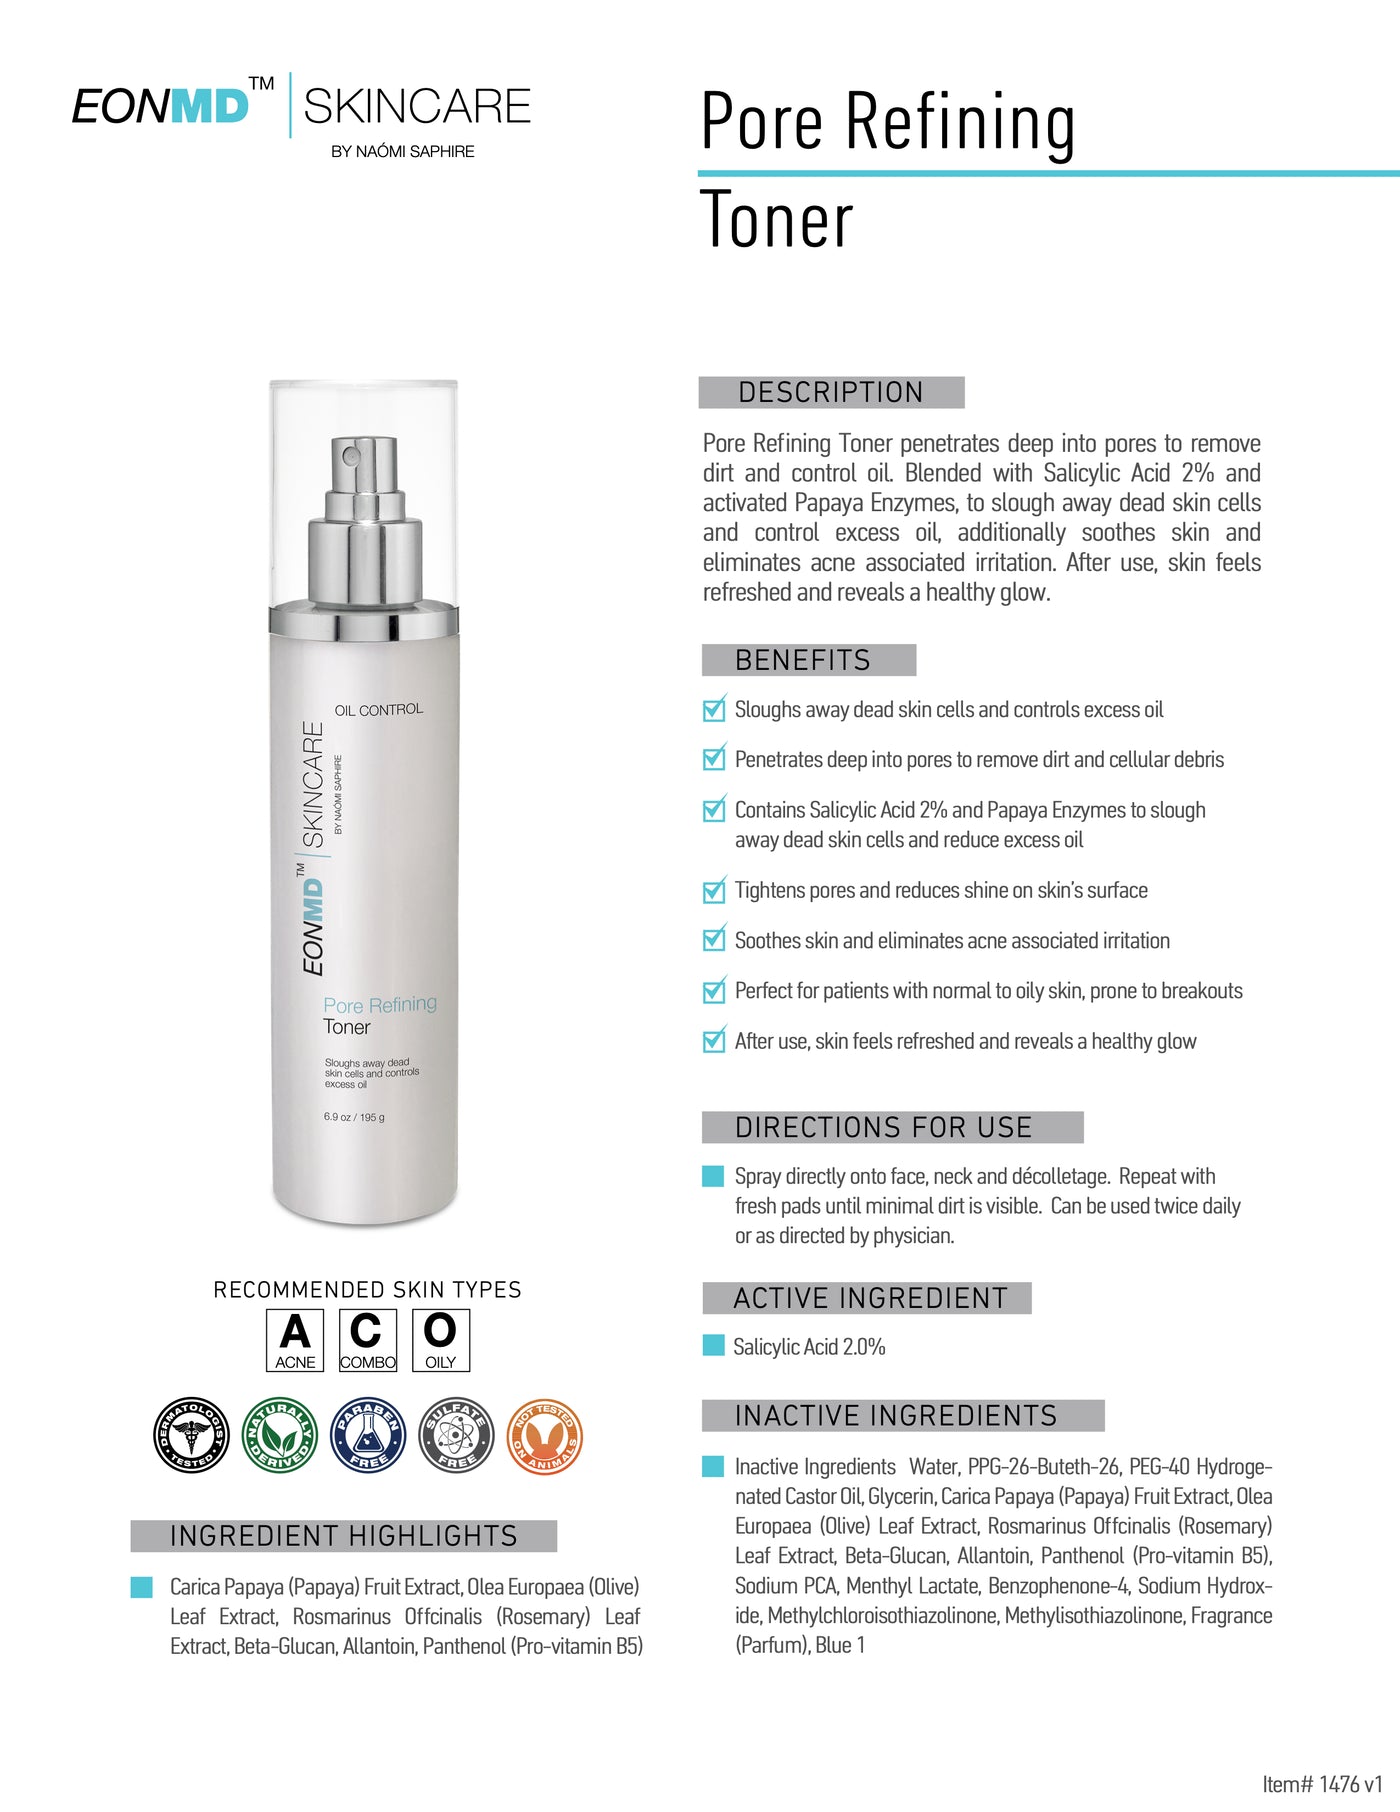 Pore Refining Toner penetrates deep into pores to remove dirt and control oil. Blended with Salicylic Acid 2% and activated Papaya Enzymes, to slough away dead skin cells and control excess oil, additionally soothes skin and eliminates acne associated irritation. After use, skin feels refreshed and reveals a healthy glow.